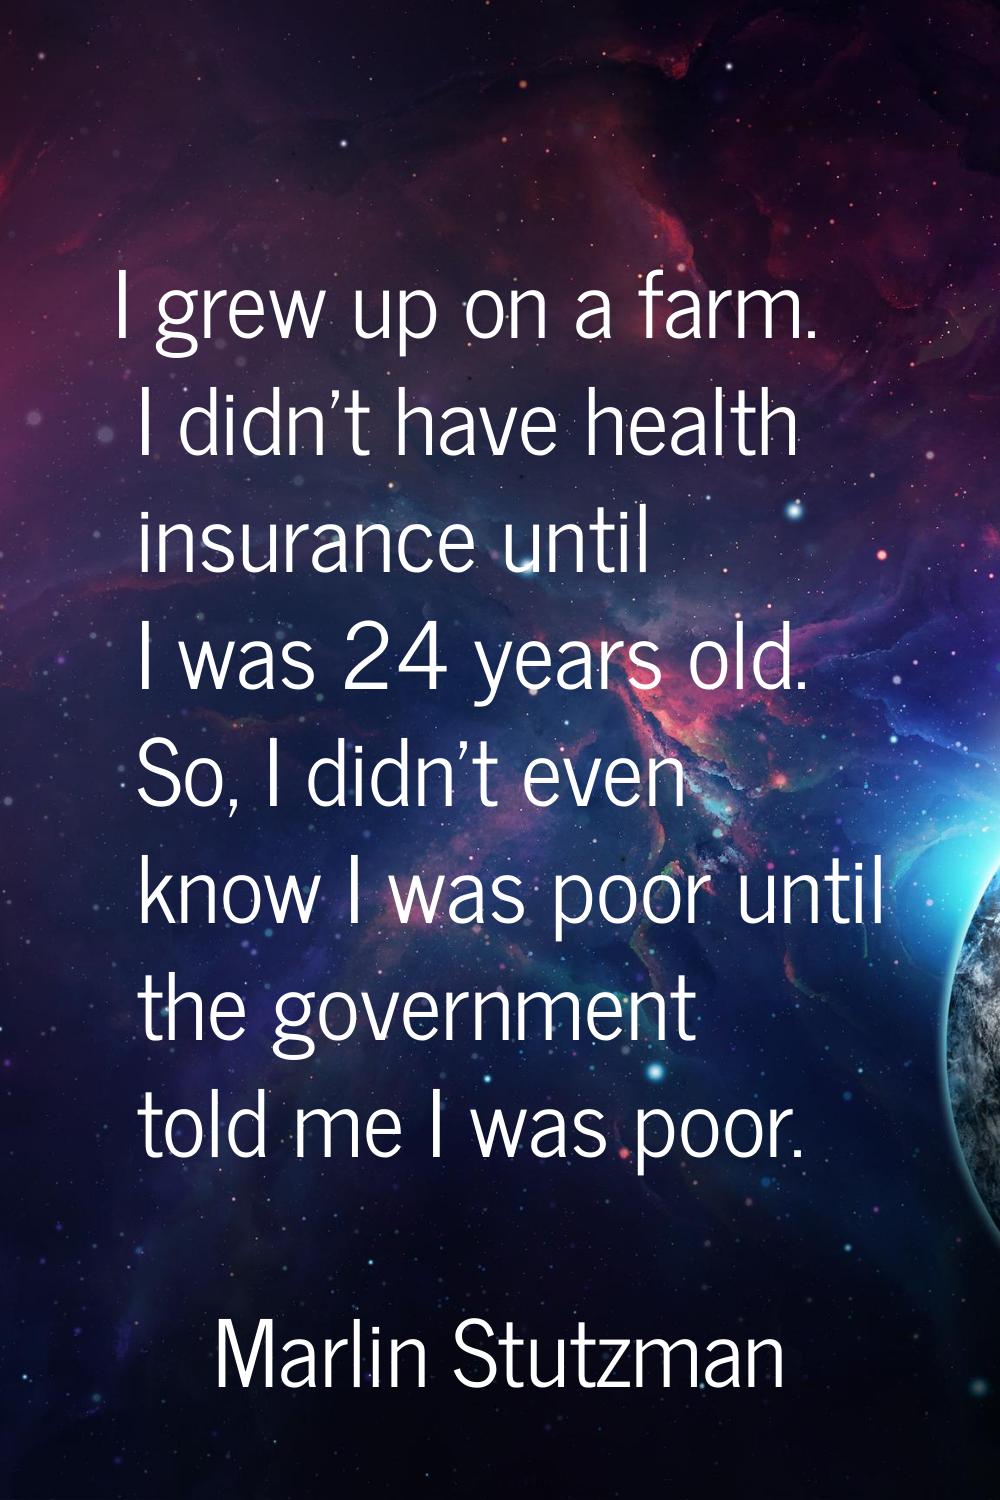 I grew up on a farm. I didn't have health insurance until I was 24 years old. So, I didn't even kno